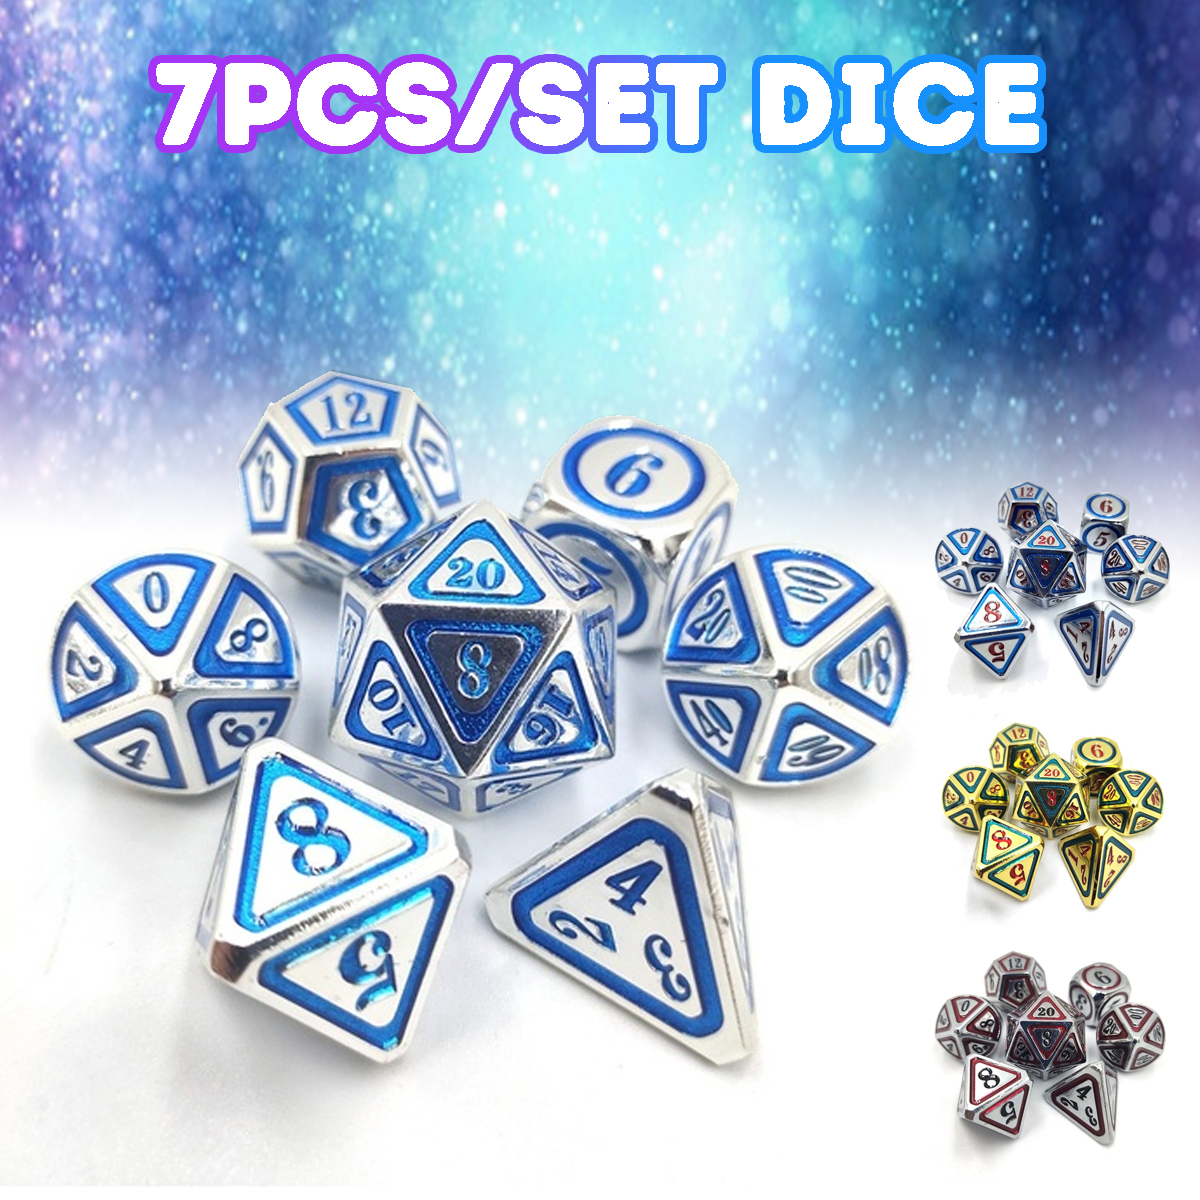 7PcsSet-Metal-Polyhedral-Dices-Set-Role-Playing-Dungeons-and-Dragons-Bag-Bar-Party-Table-Games-Dice-1649987-1